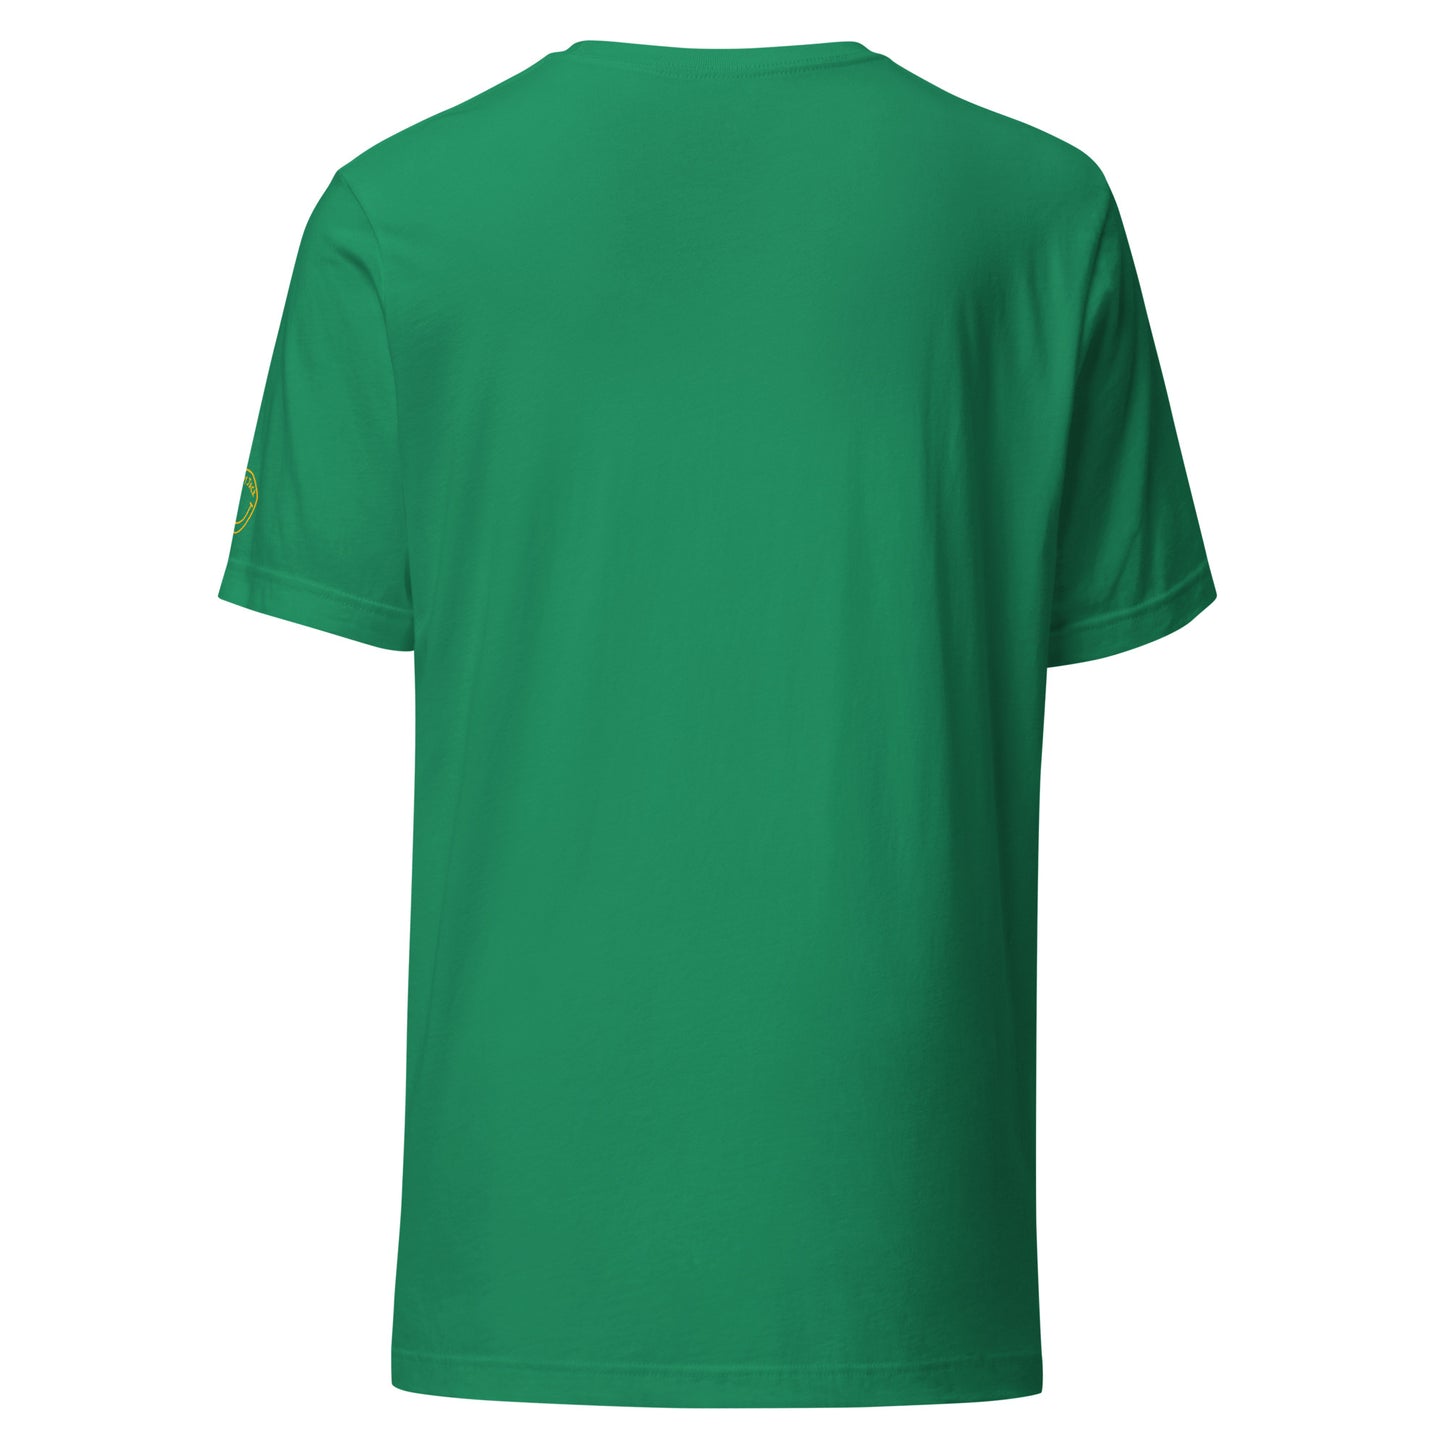 Taped off Tee (10 colors)